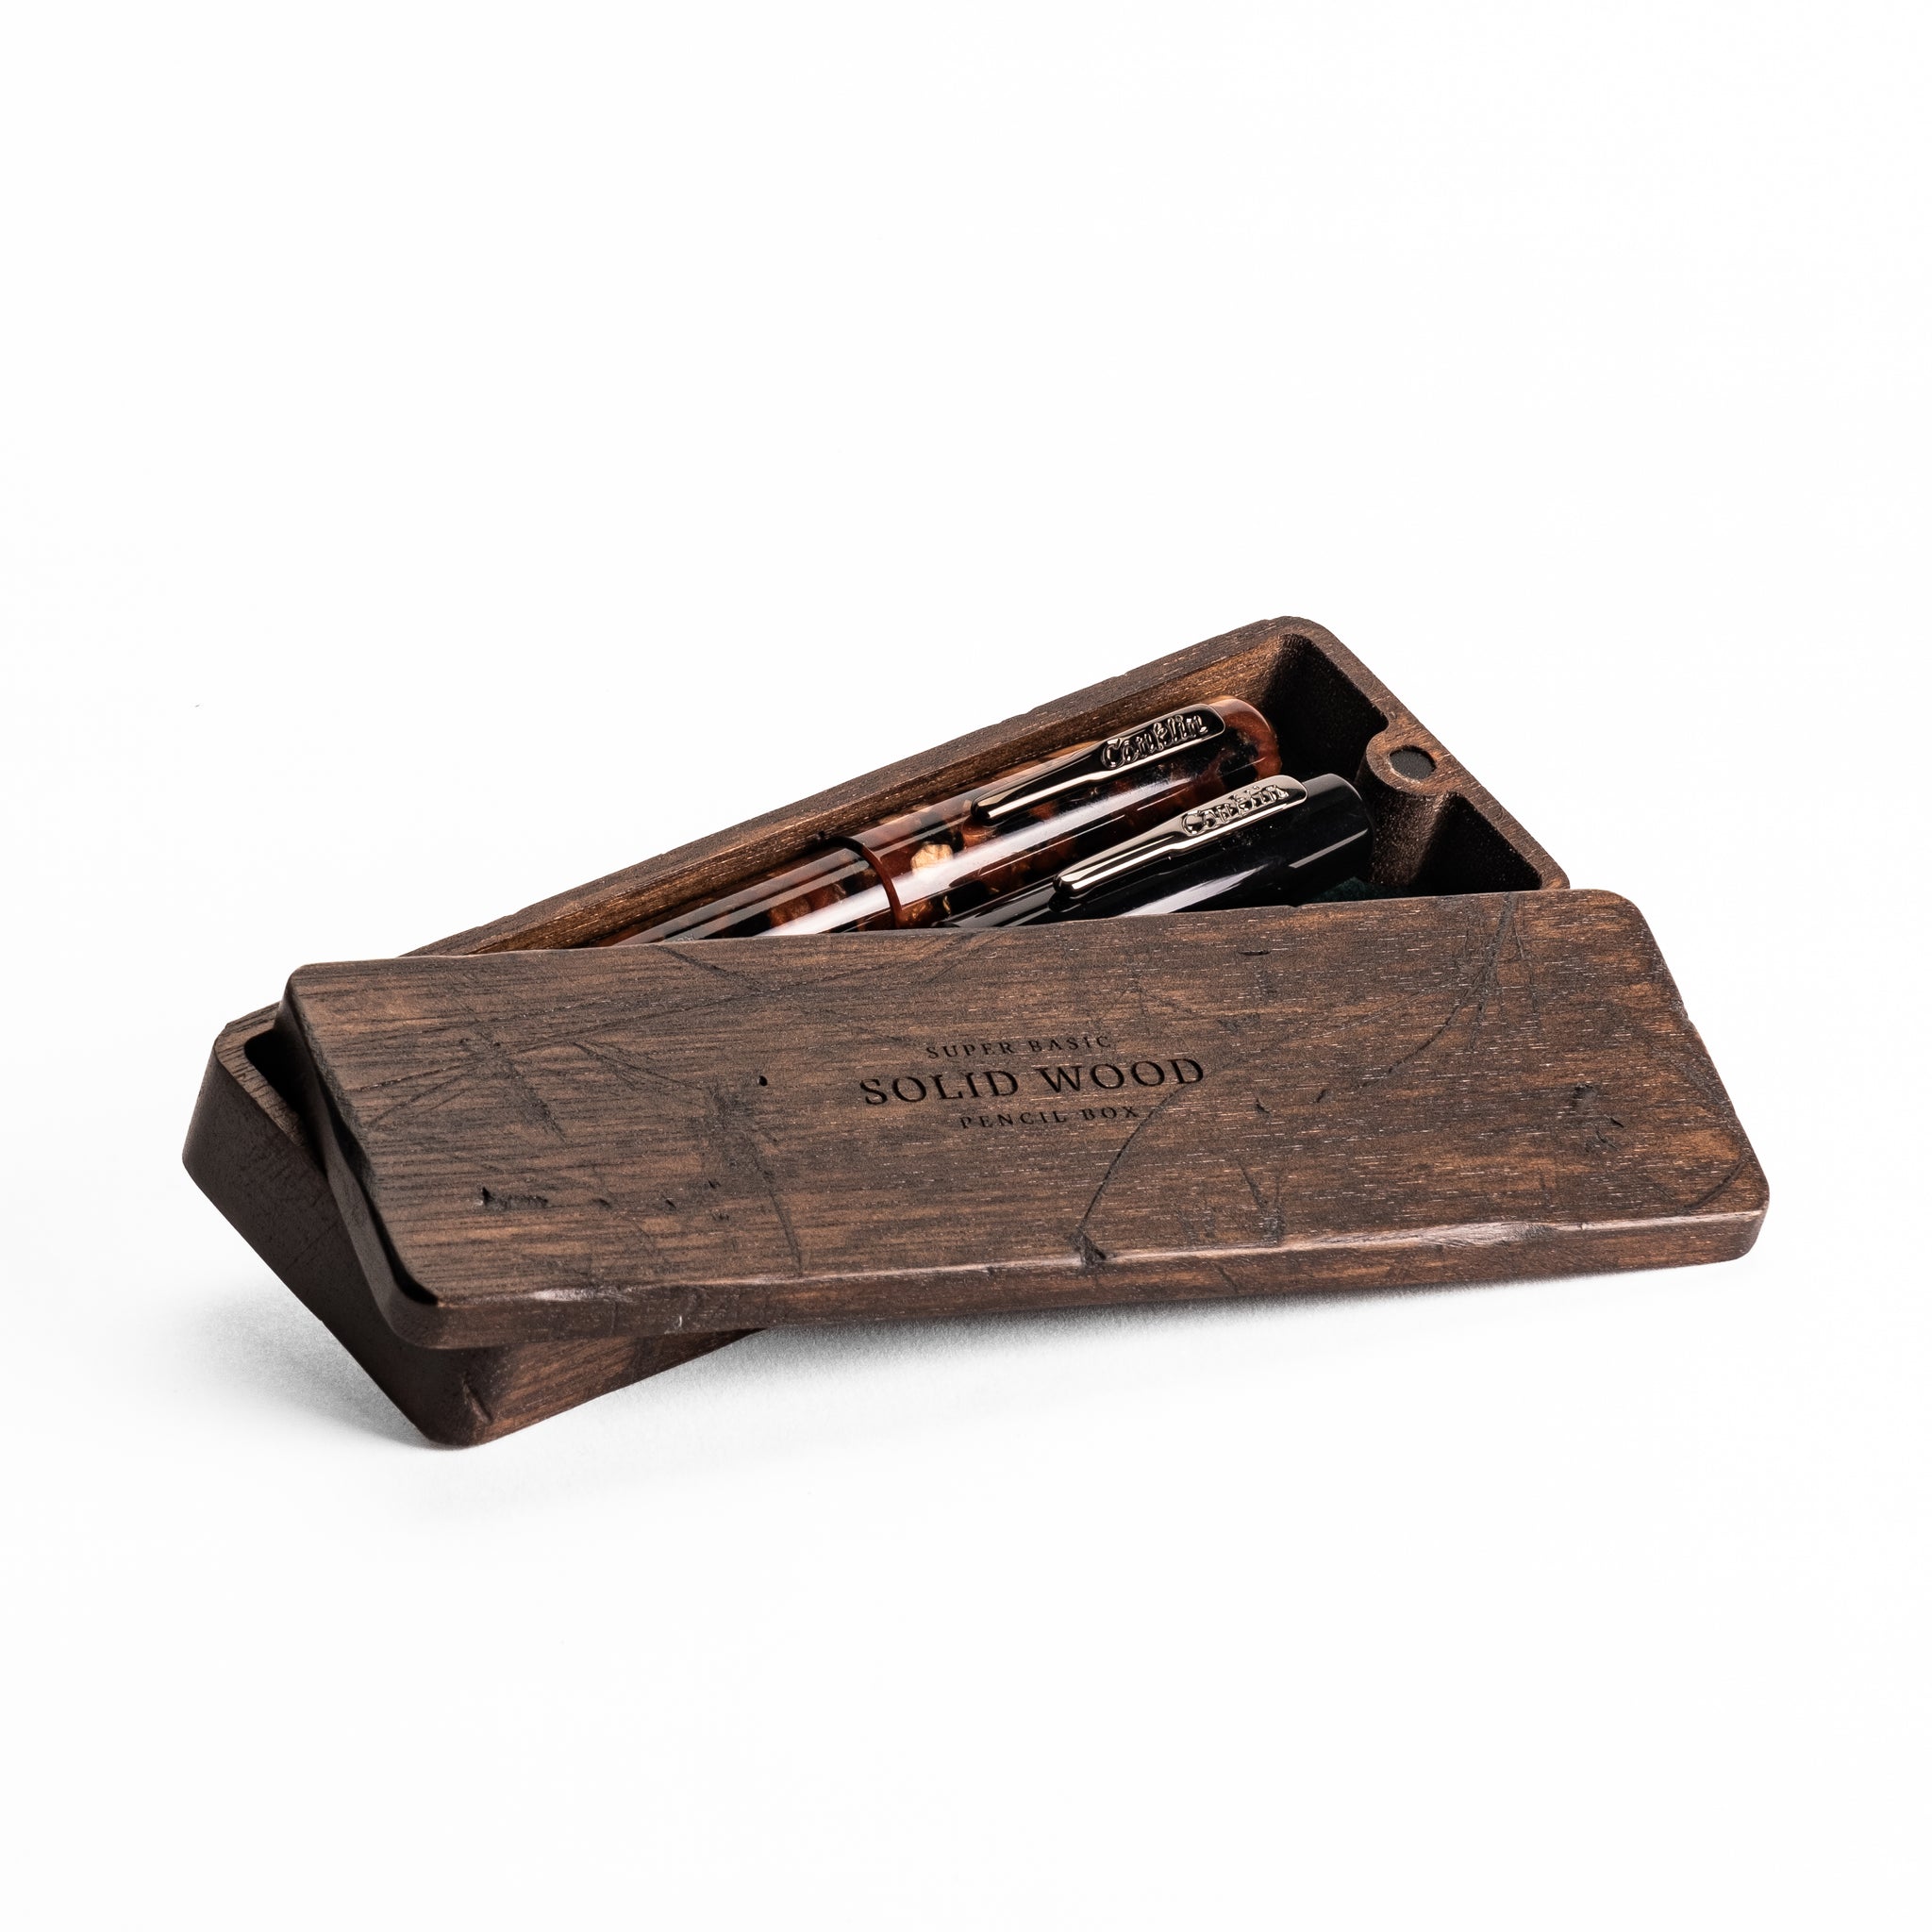 Super Basic Solid Wood Pencil Case (Weathered)